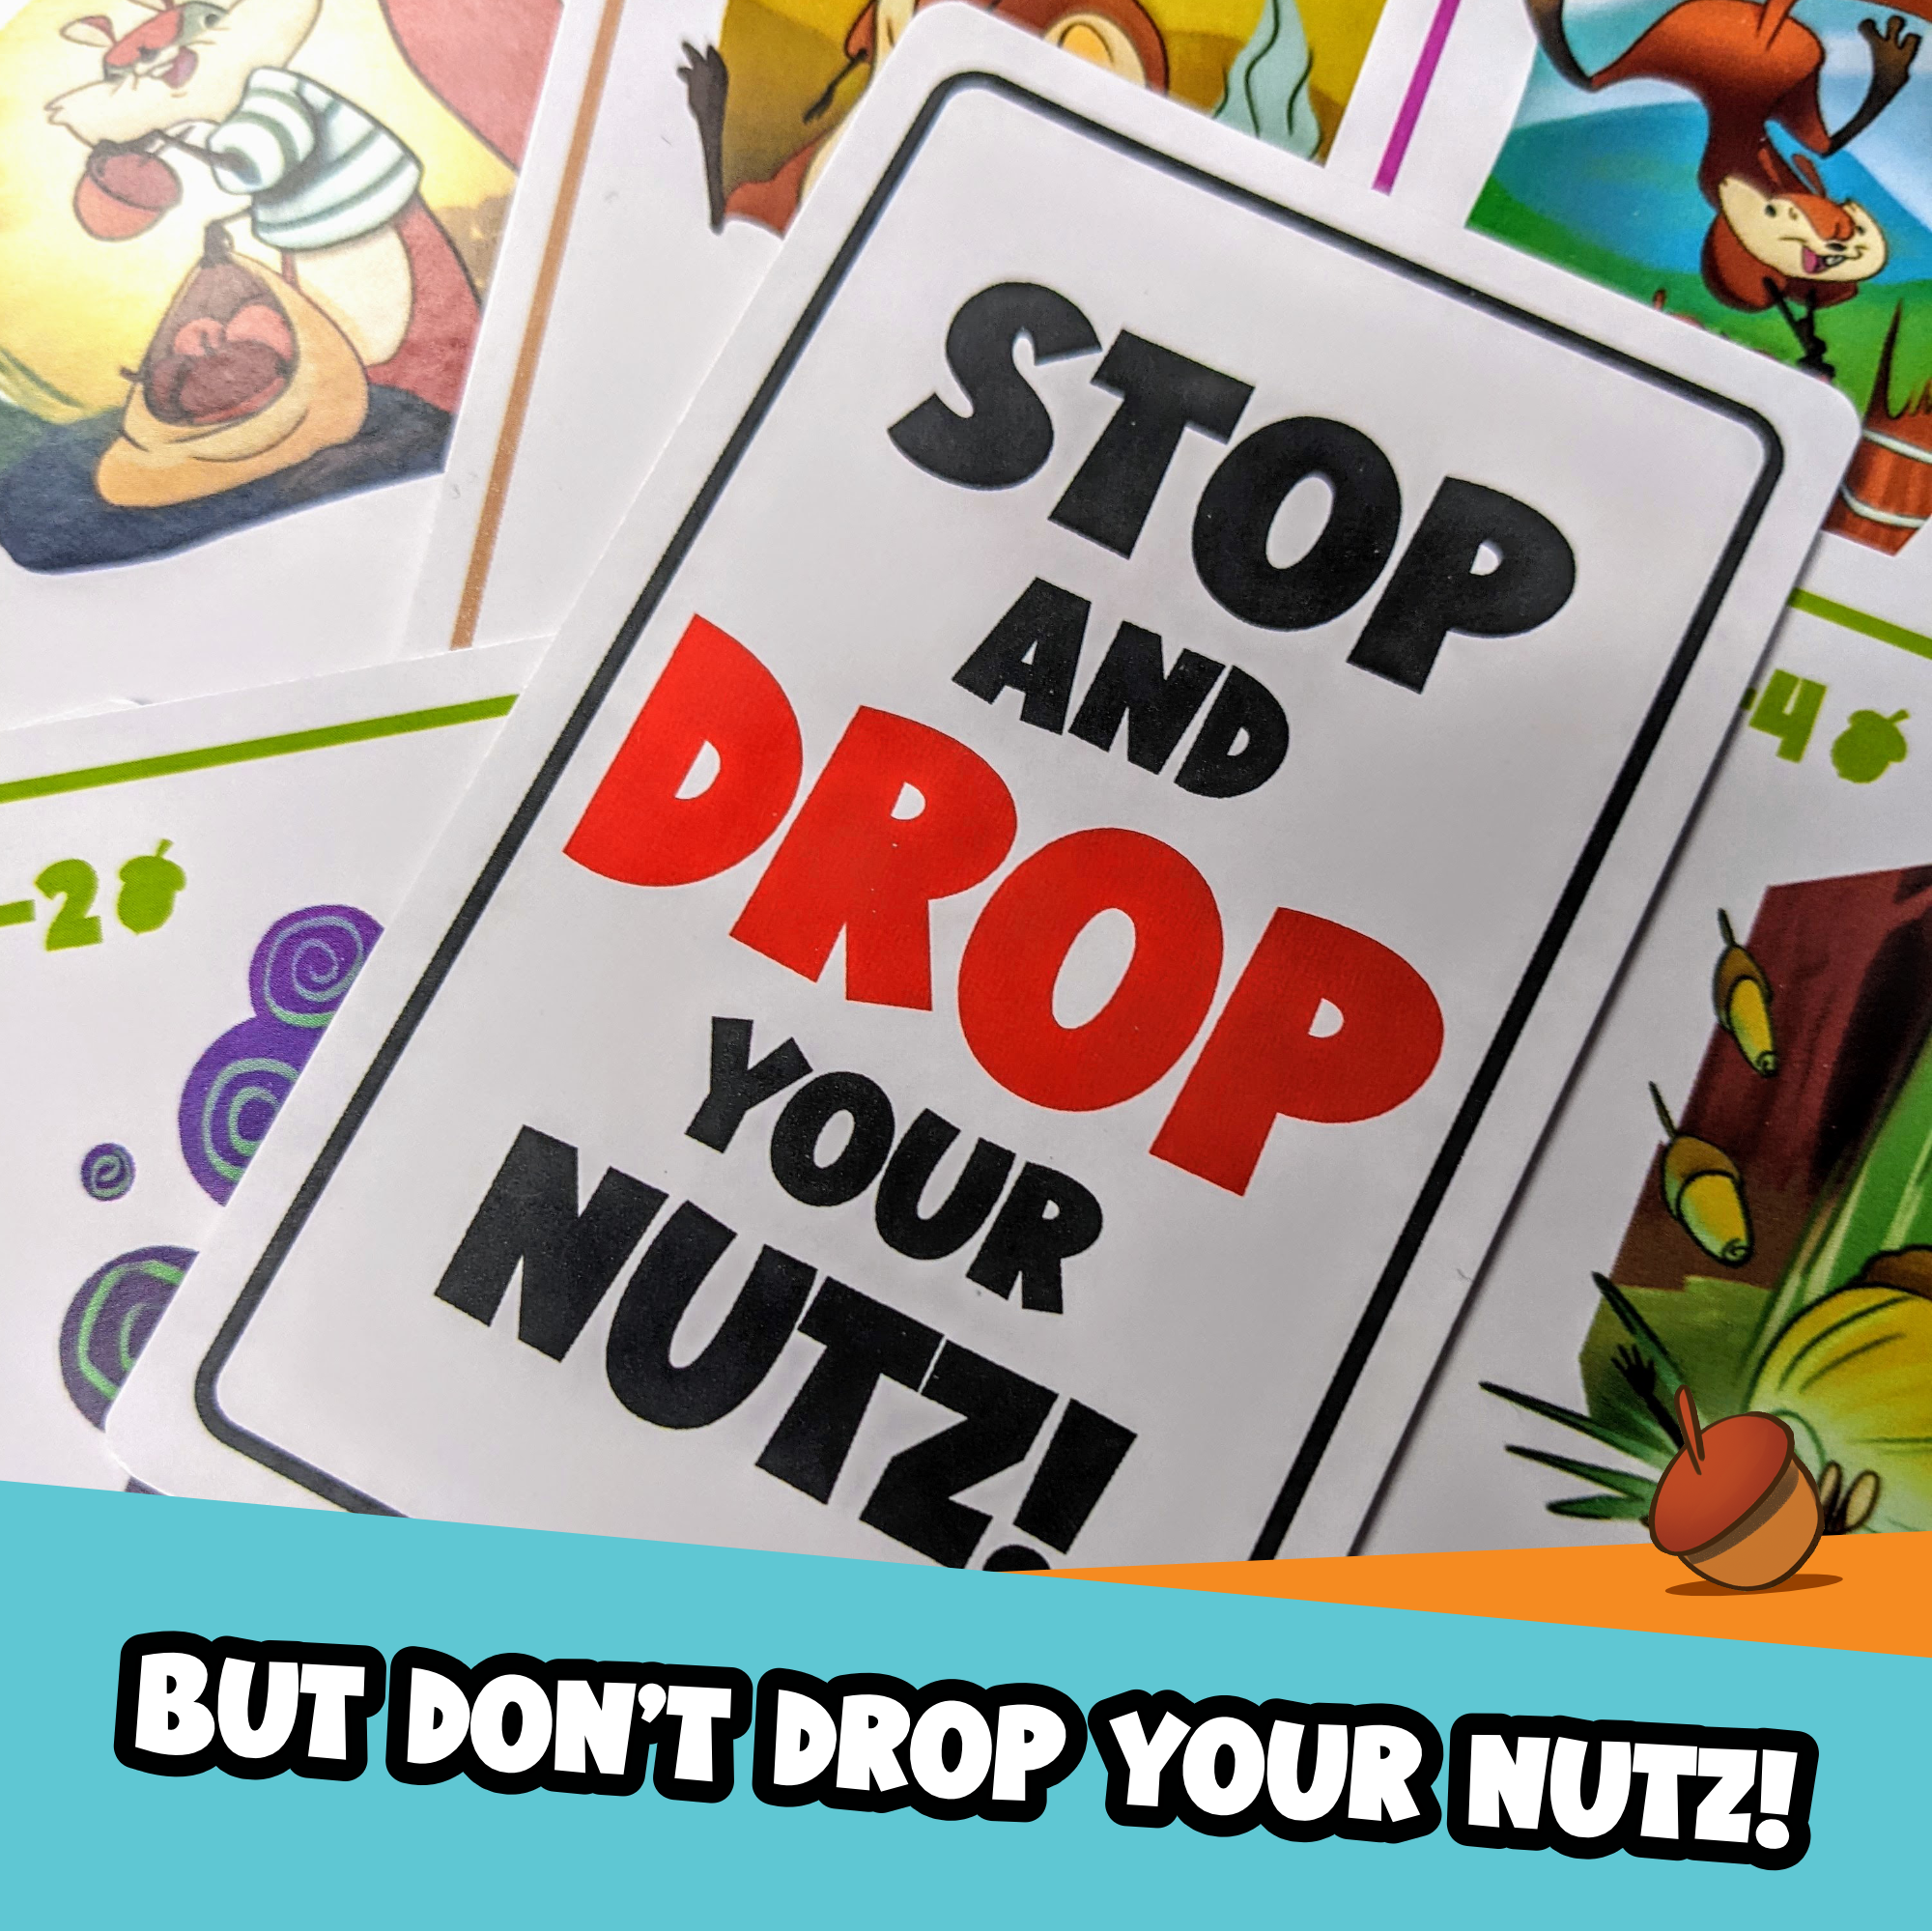 Oh Nutz! Card Game - Family Game Night Has Gone Nutz! - Bards & Cards